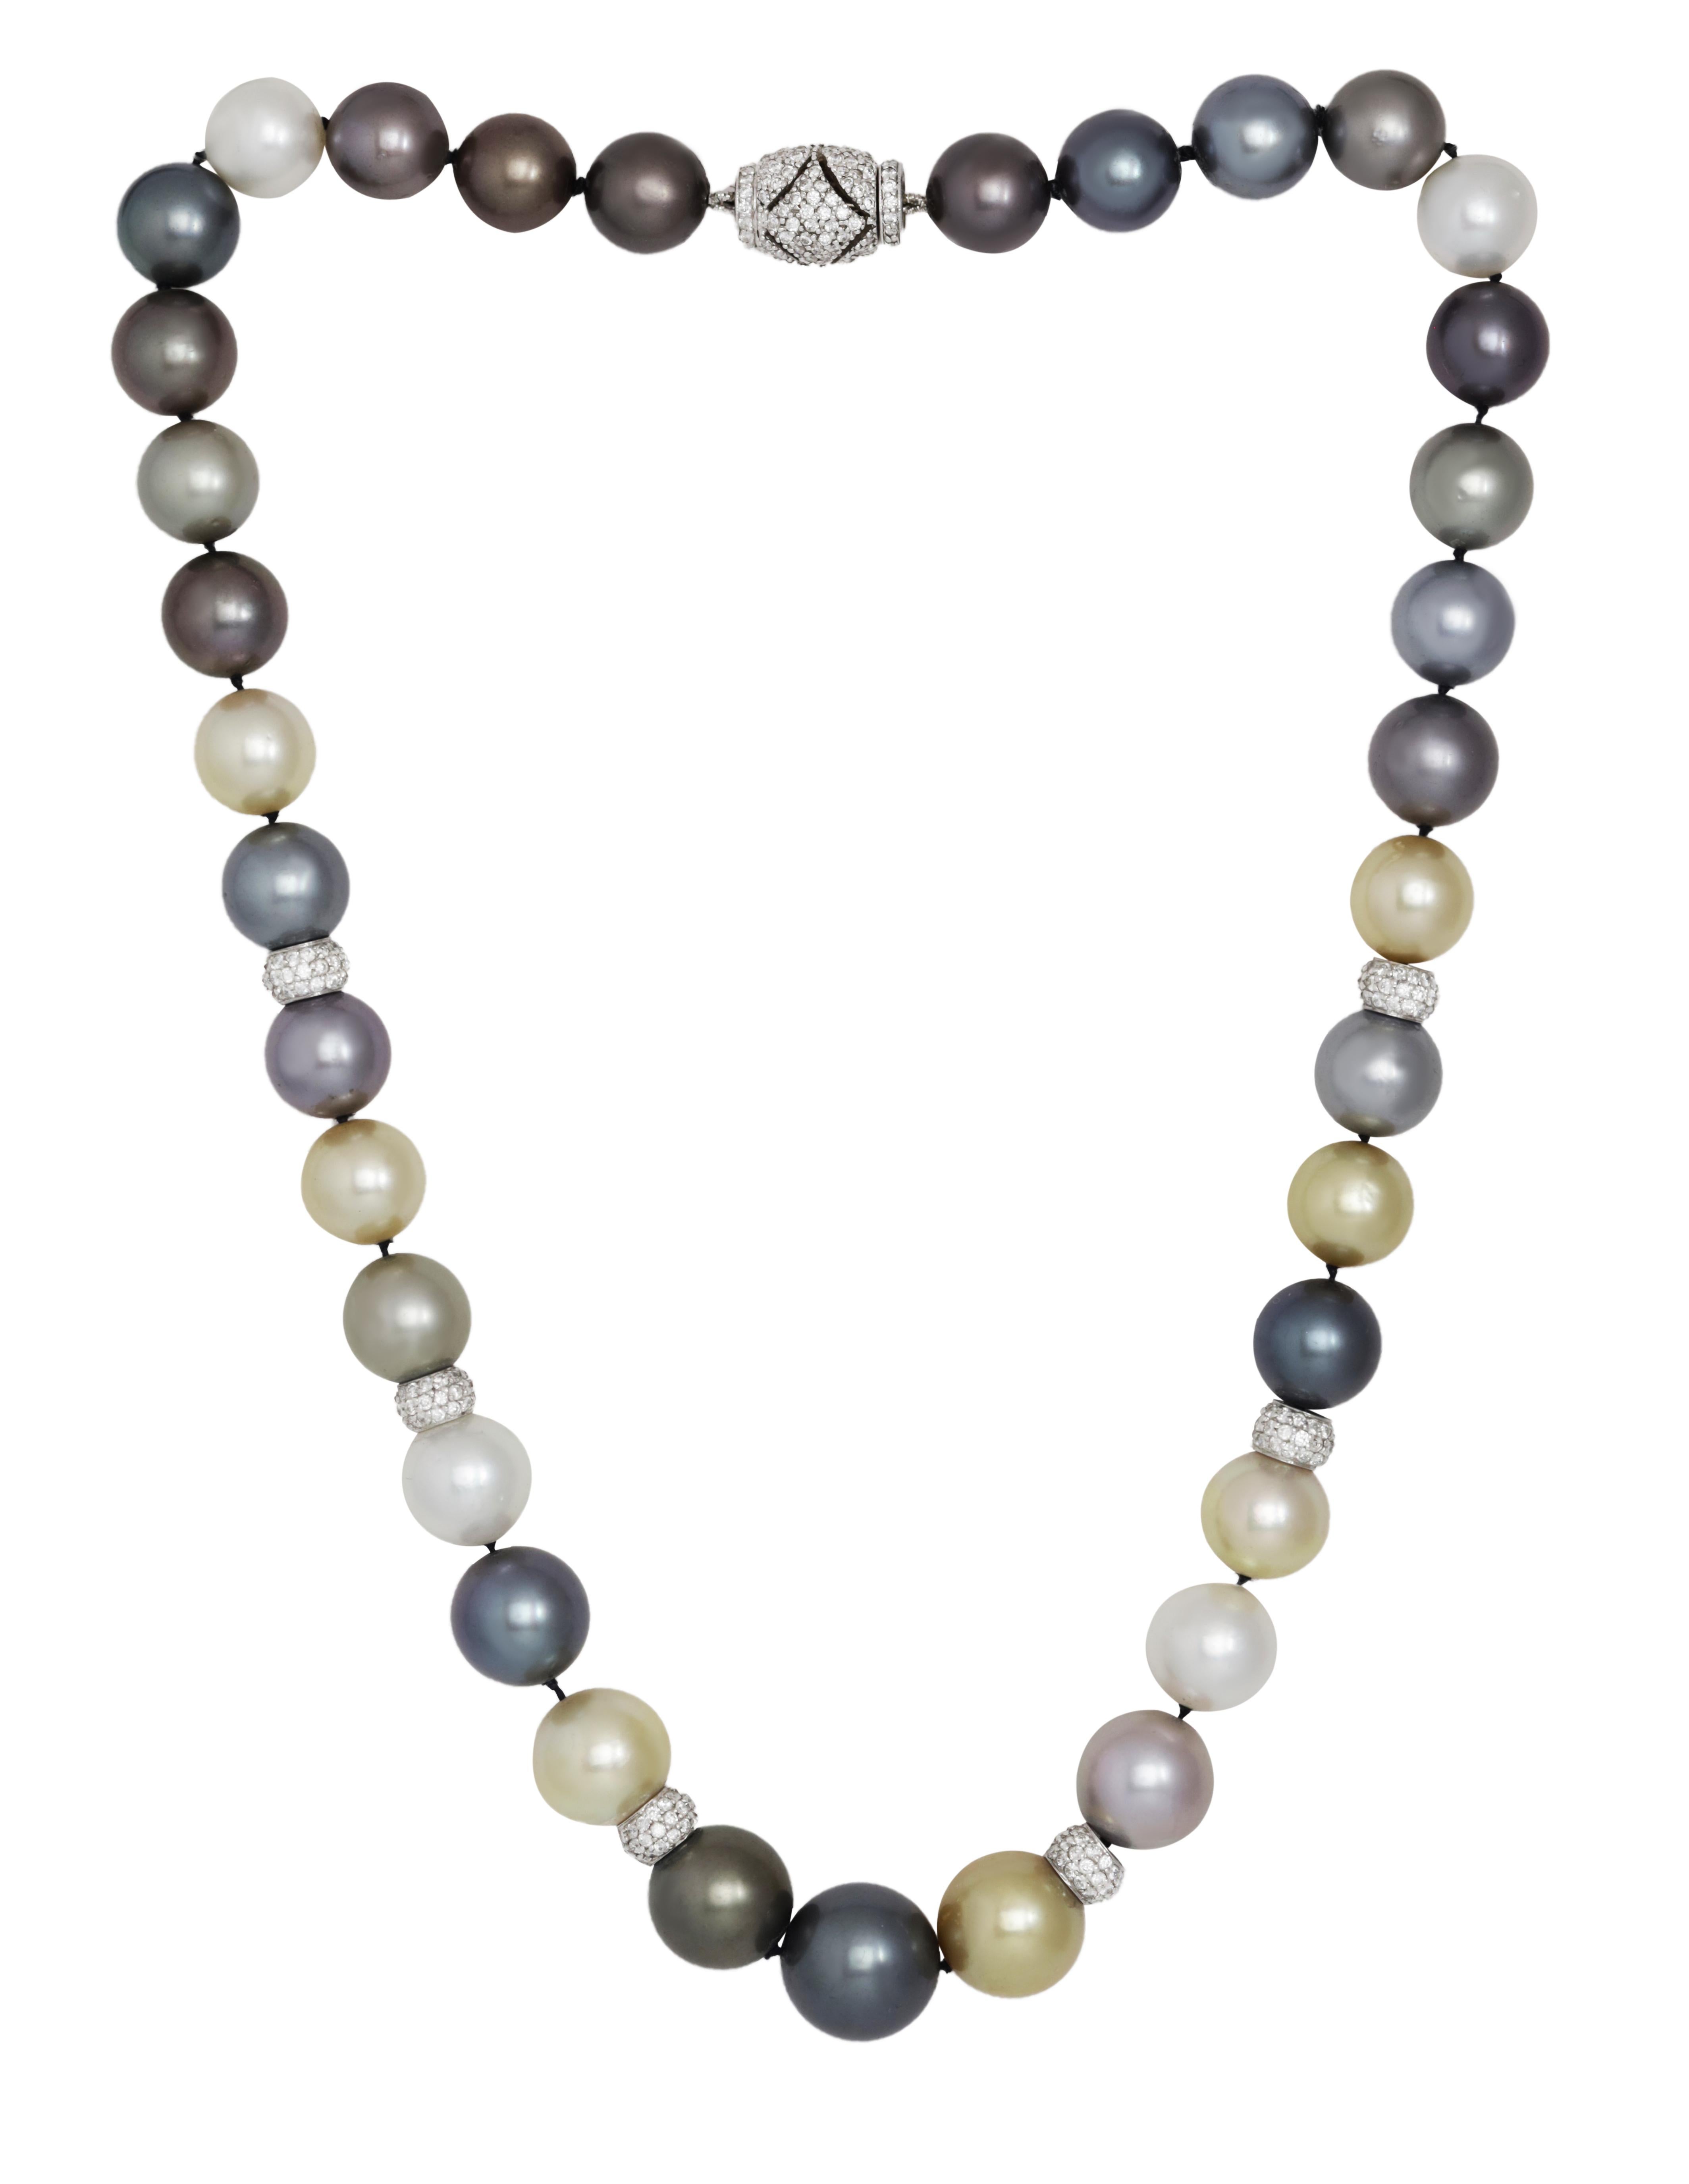 Diamond and pearl necklace adorned with 10-14 mm Tahitian south sea pearls and rondels containing 5.25 cts tw of micropave round diamonds
Diana M. is a leading supplier of top-quality fine jewelry for over 35 years.
Diana M is one-stop shop for all